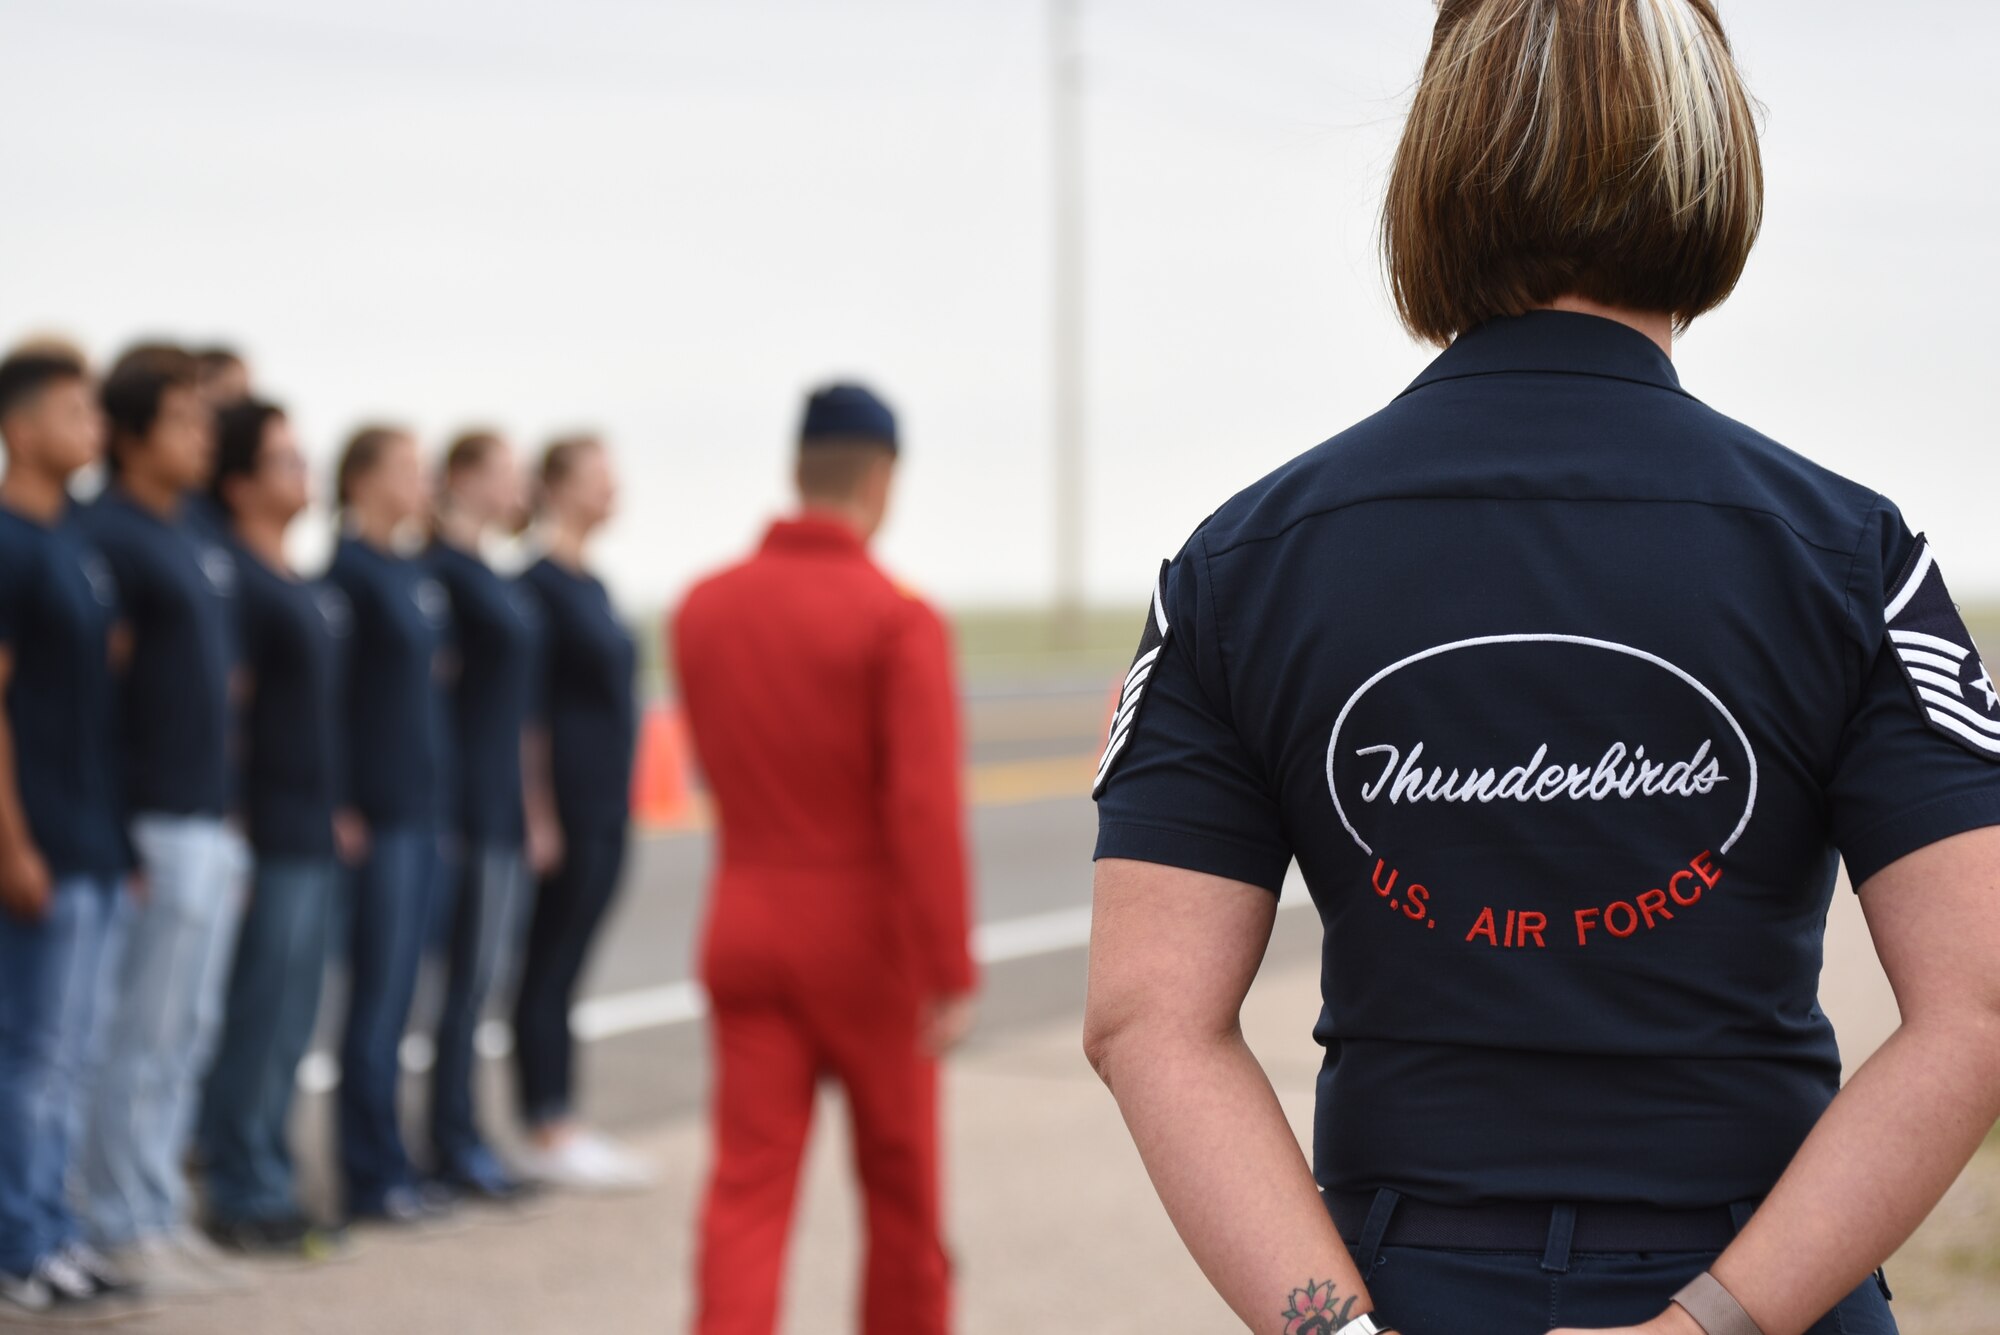 Master Sgt. Christine Powers, Air Demonstration Squadron Public Affairs, stands by as Air Force recruits swear into the Delayed Entry Program during the Thunderbirds airshow July 25, 2018, in Cheyenne, Wyo. The airshow provides a chance for the local community and worldwide visitors of CFD to see the U.S. Air Force in action over the skies of Cheyenne. (U.S. Air Force photo by Airman 1st Class Abbigayle Wagner)